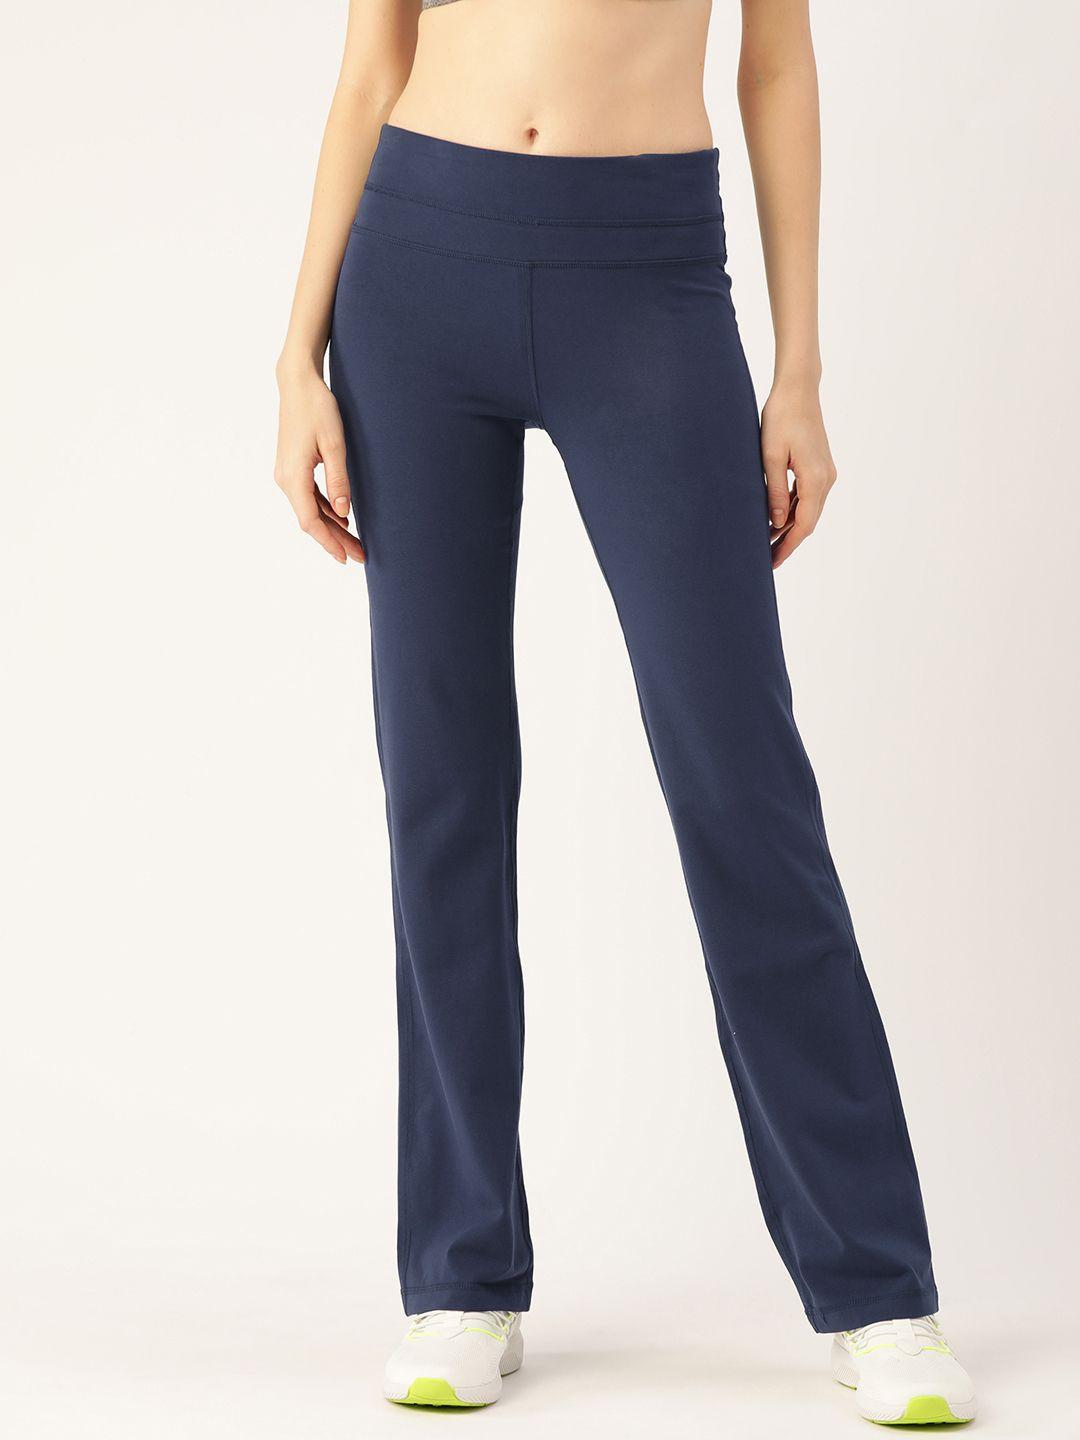 macy's ideology women navy blue solid flared track pants